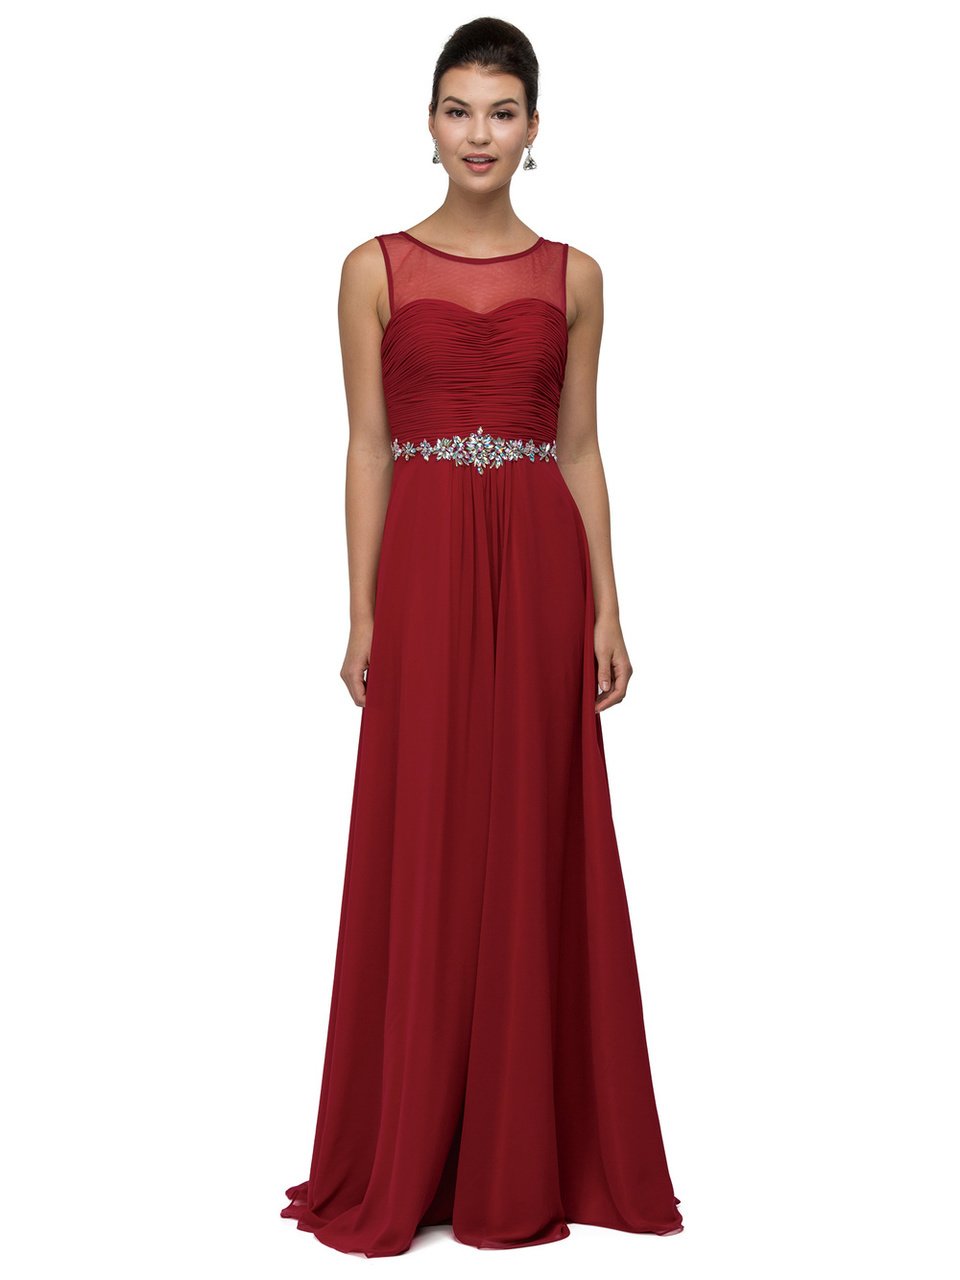 Dancing Queen Bridal - 9541 Ruched Illusion Sweetheart Jewel-banded Chiffon A-line Dress Bridesmaid Dresses XS / Burgundy